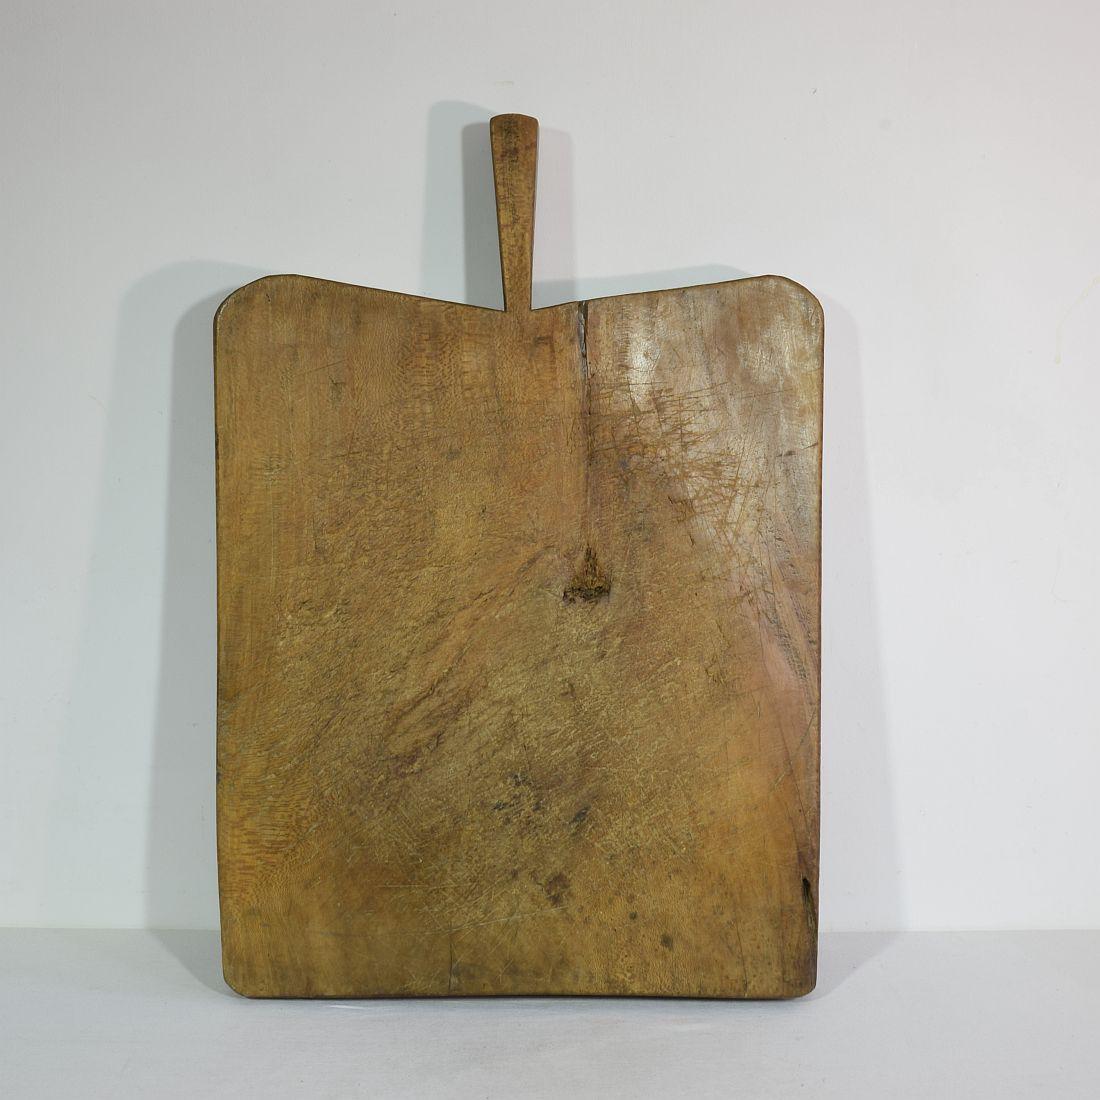 Giant 19th Century, French Wooden Chopping or Cutting Board 5